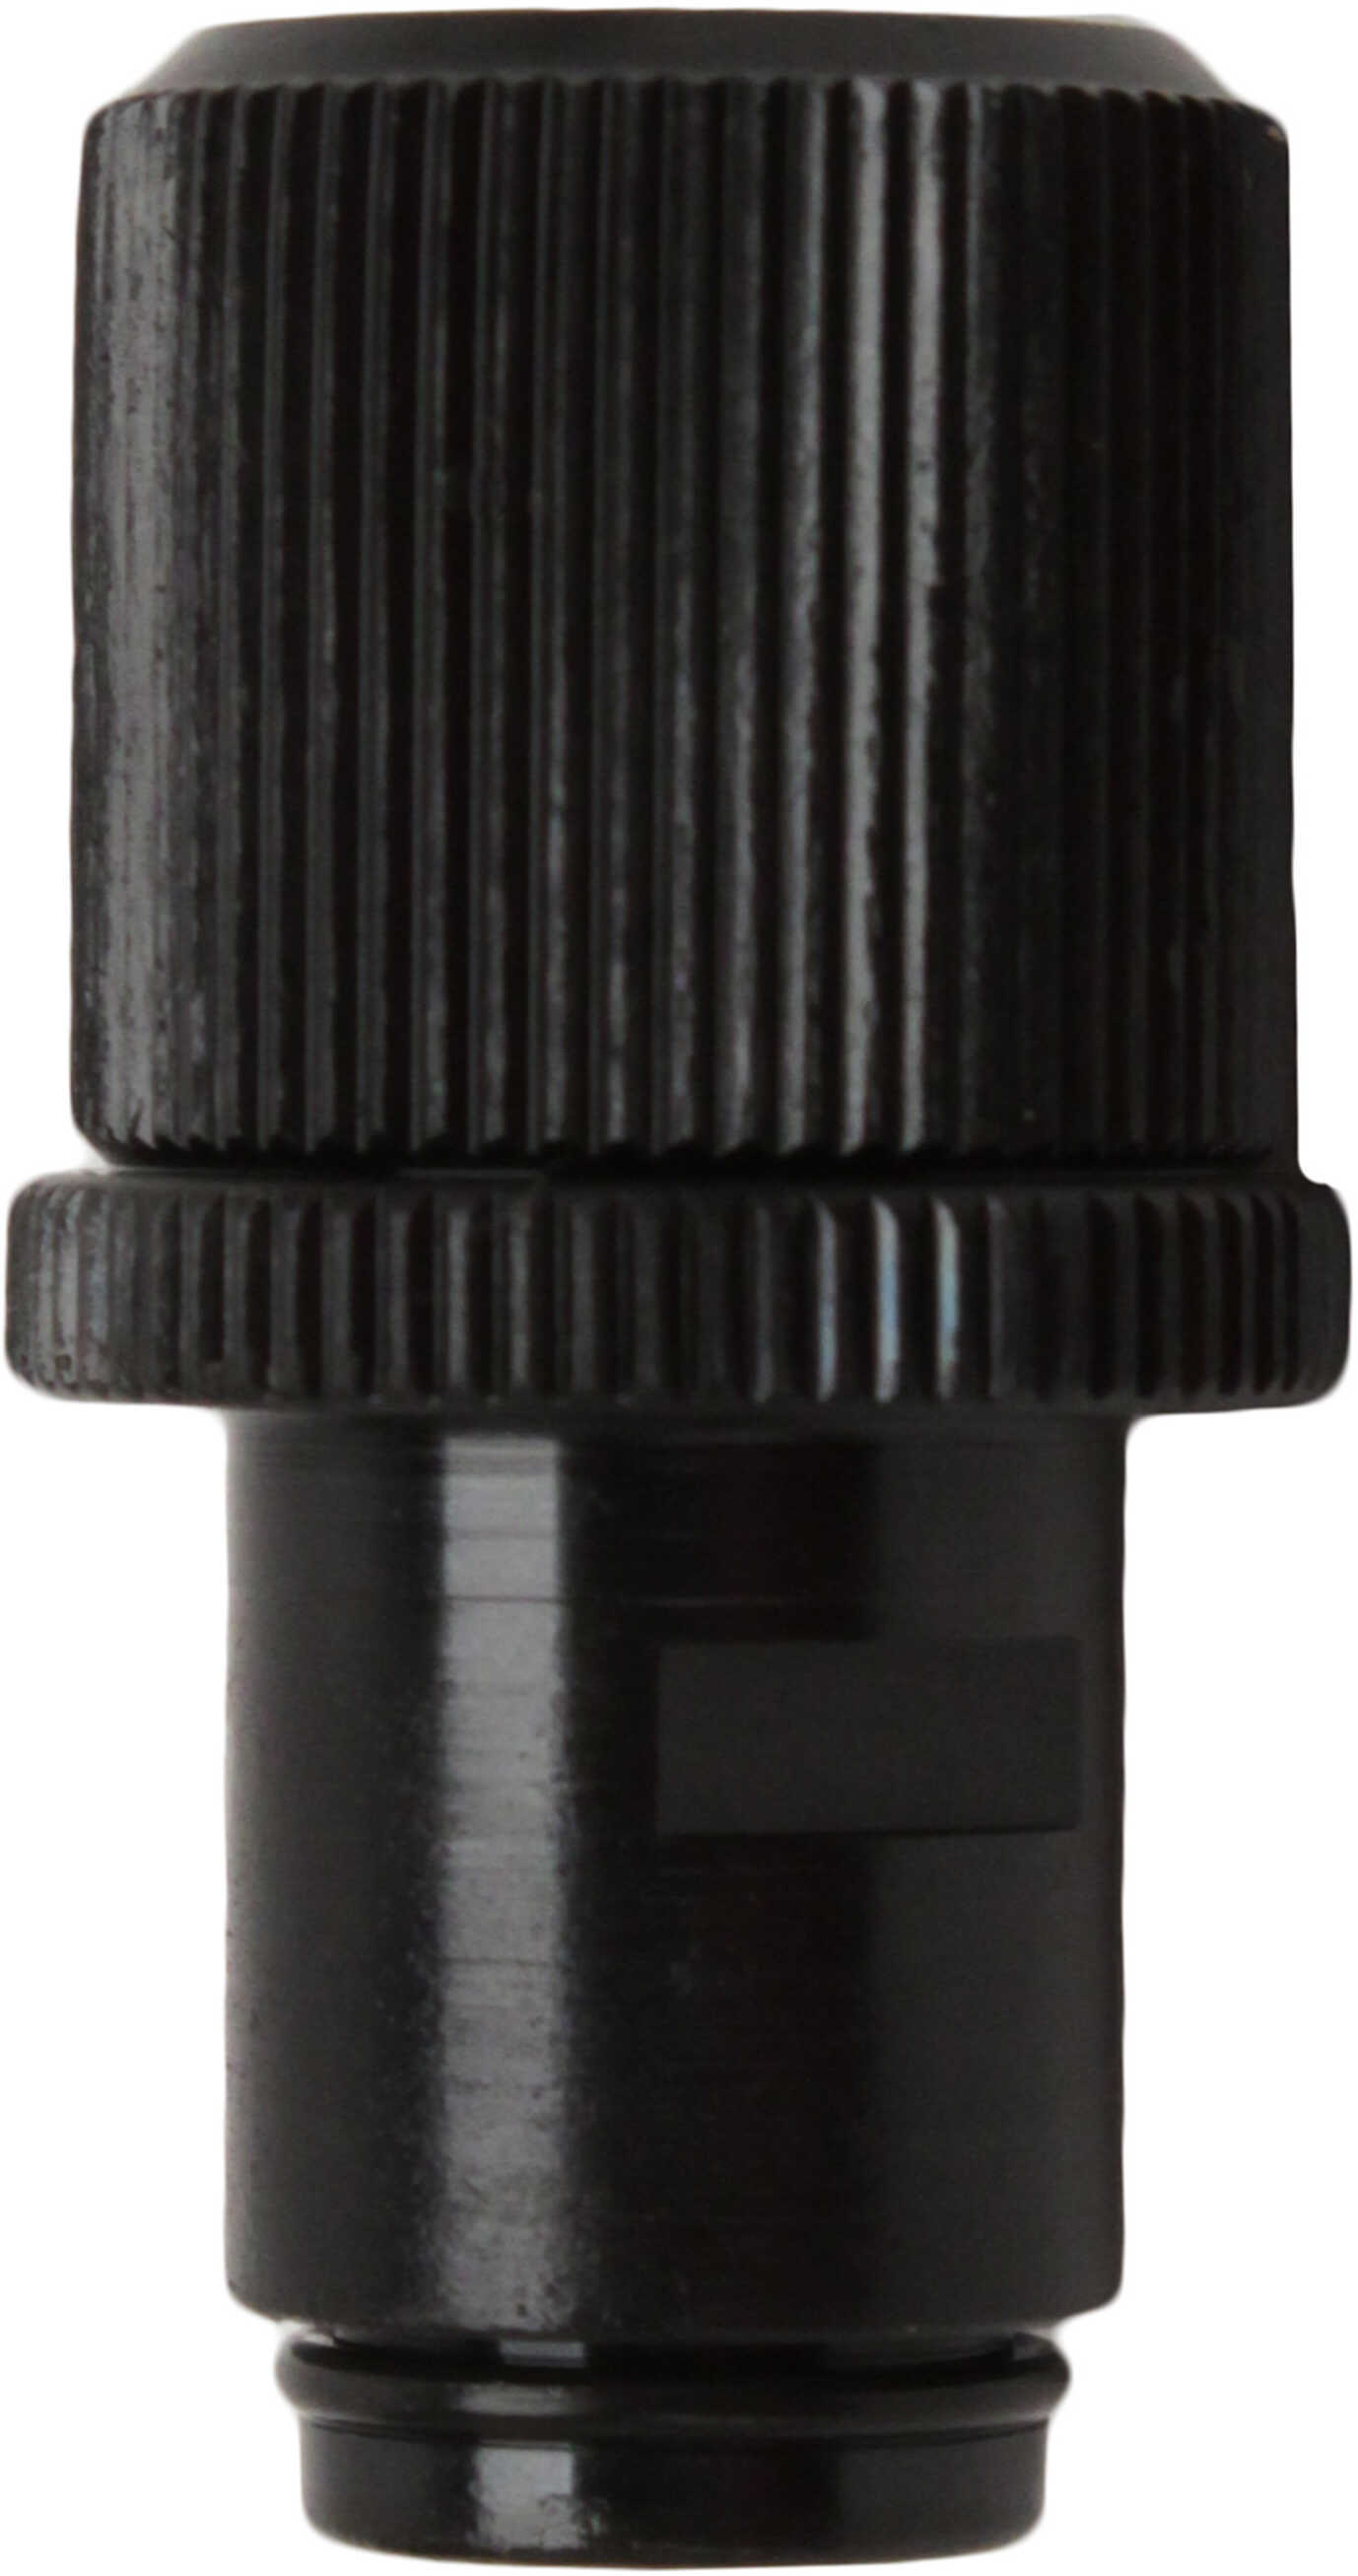 Walther Threaded Barrel-Adapter P22 Md: 512105-img-1